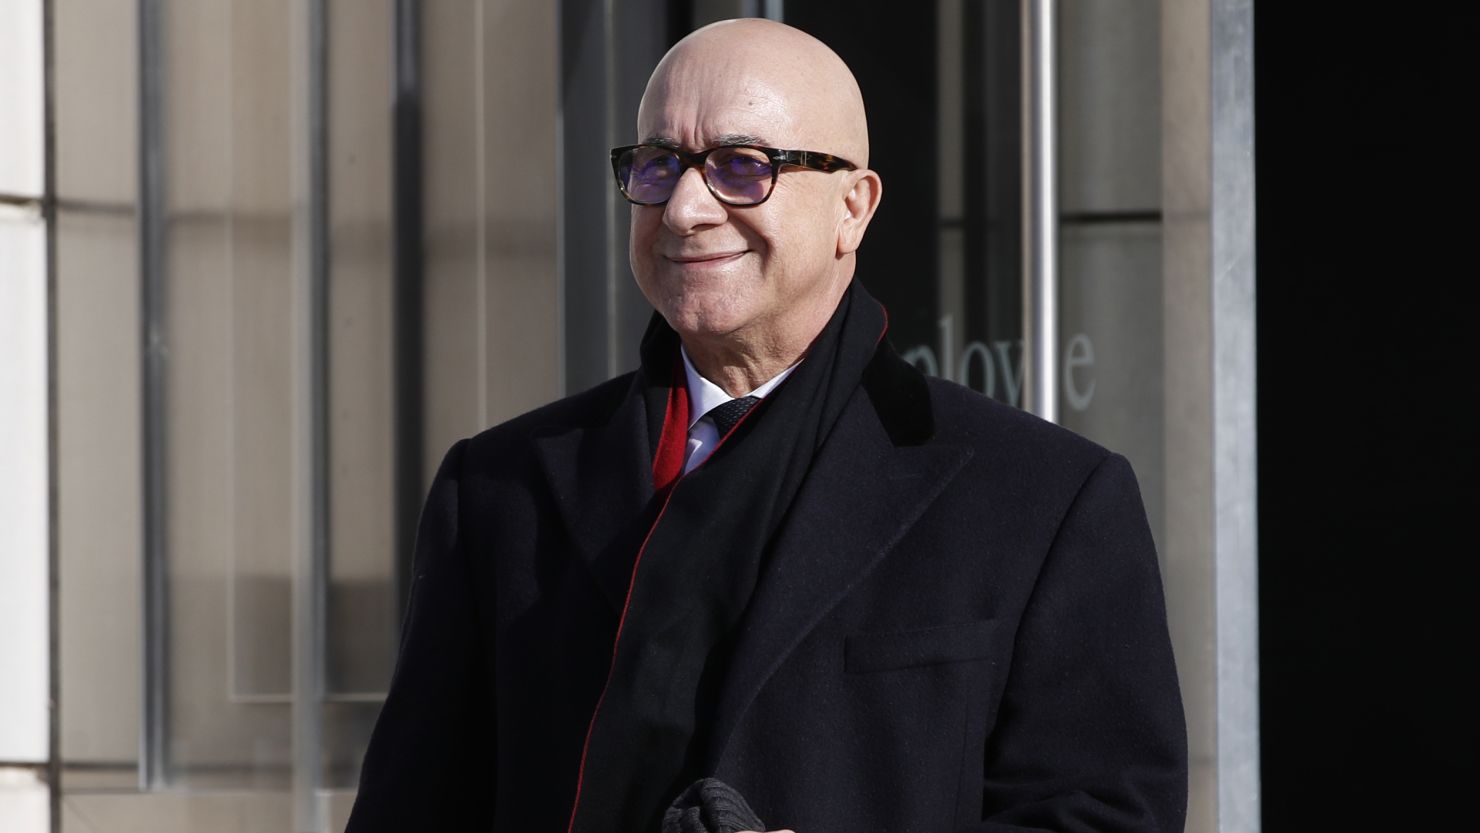 FILE - In a Dec. 17, 2018 file photo, Bijan Kian leaves the FBI Washington Field Office in Washington. Kian is accused of illegally acting as an agent of the Turkish government. In opening statements at Kian's trial Monday, July 15, 2019 in Alexandria, prosecutors say Kian , a one-time business partner of former national security adviser Michael Flynn, lied to hide the fact that he and Flynn were secretly working on behalf of the Turkish government to advance its agenda.  (AP Photo/Jacquelyn Martin, File)